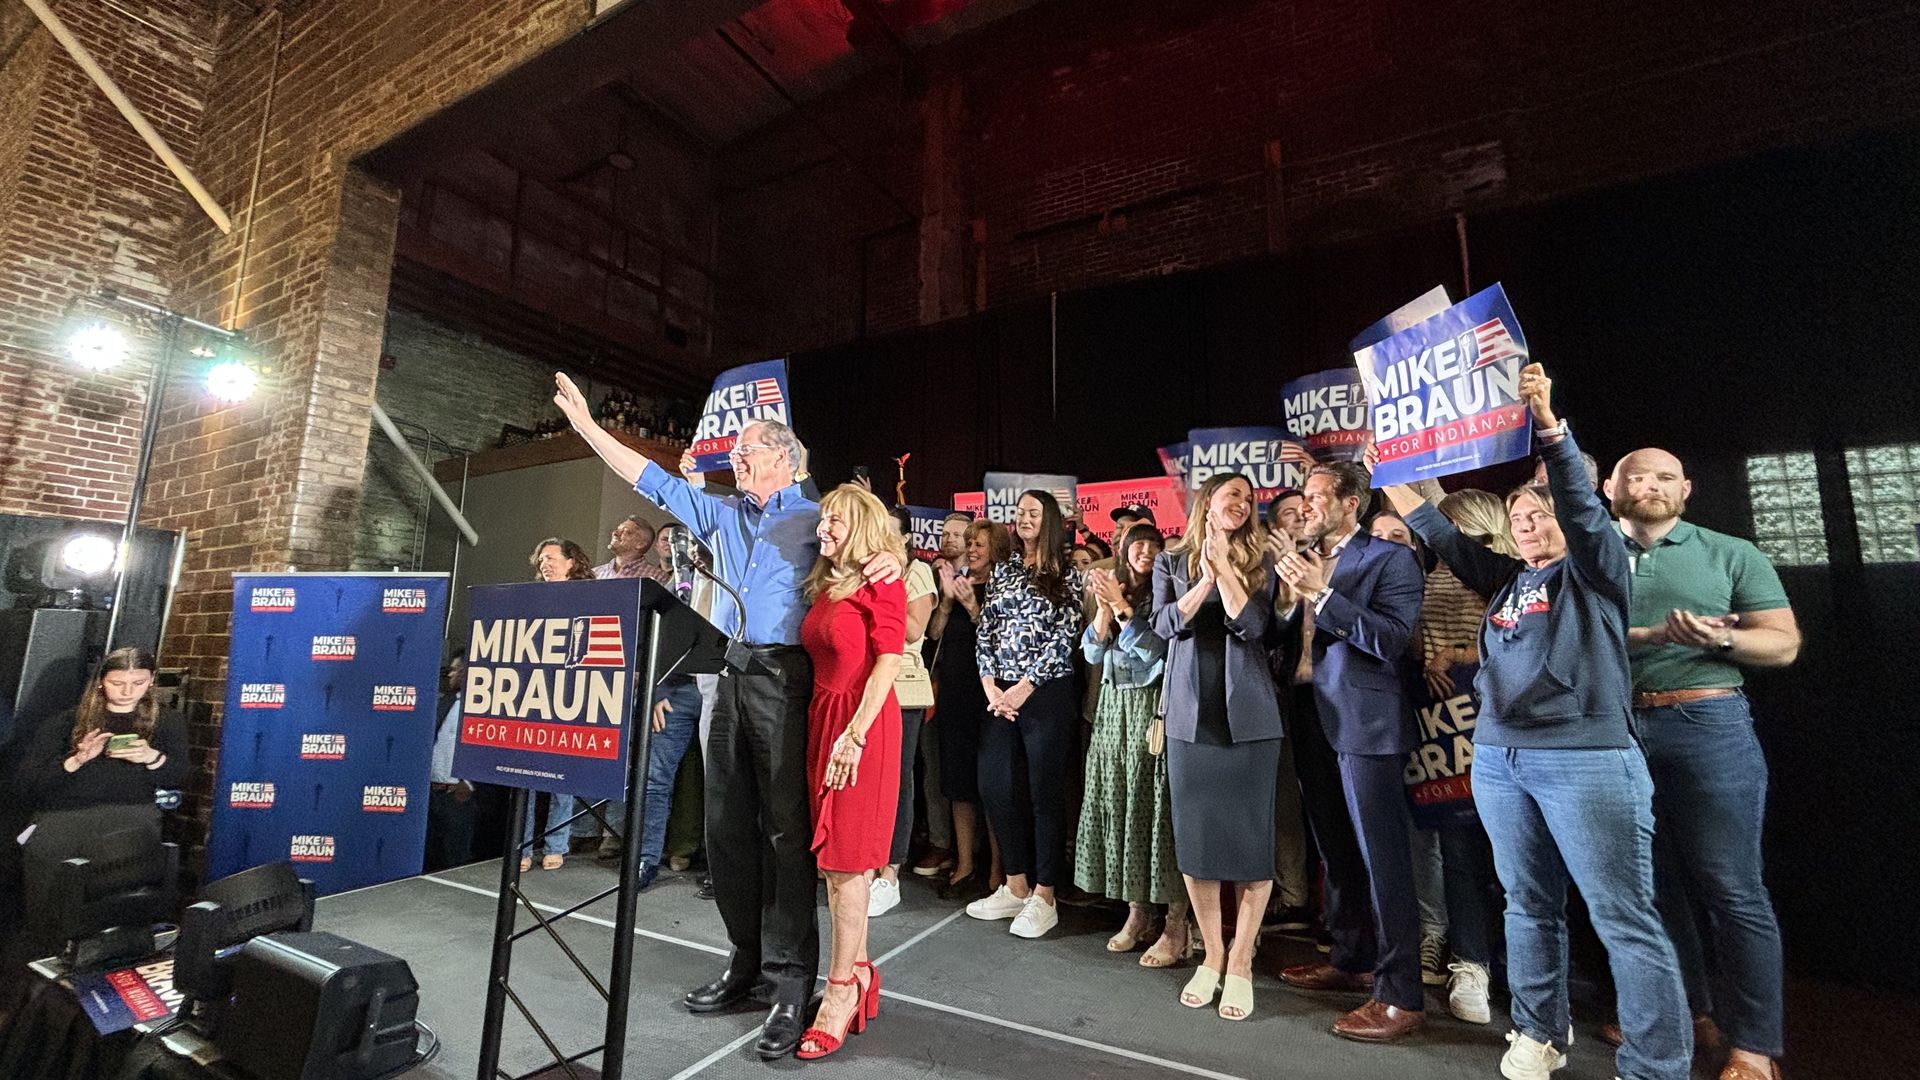 Mike Braun hugging his wife on a stage in front of supporters